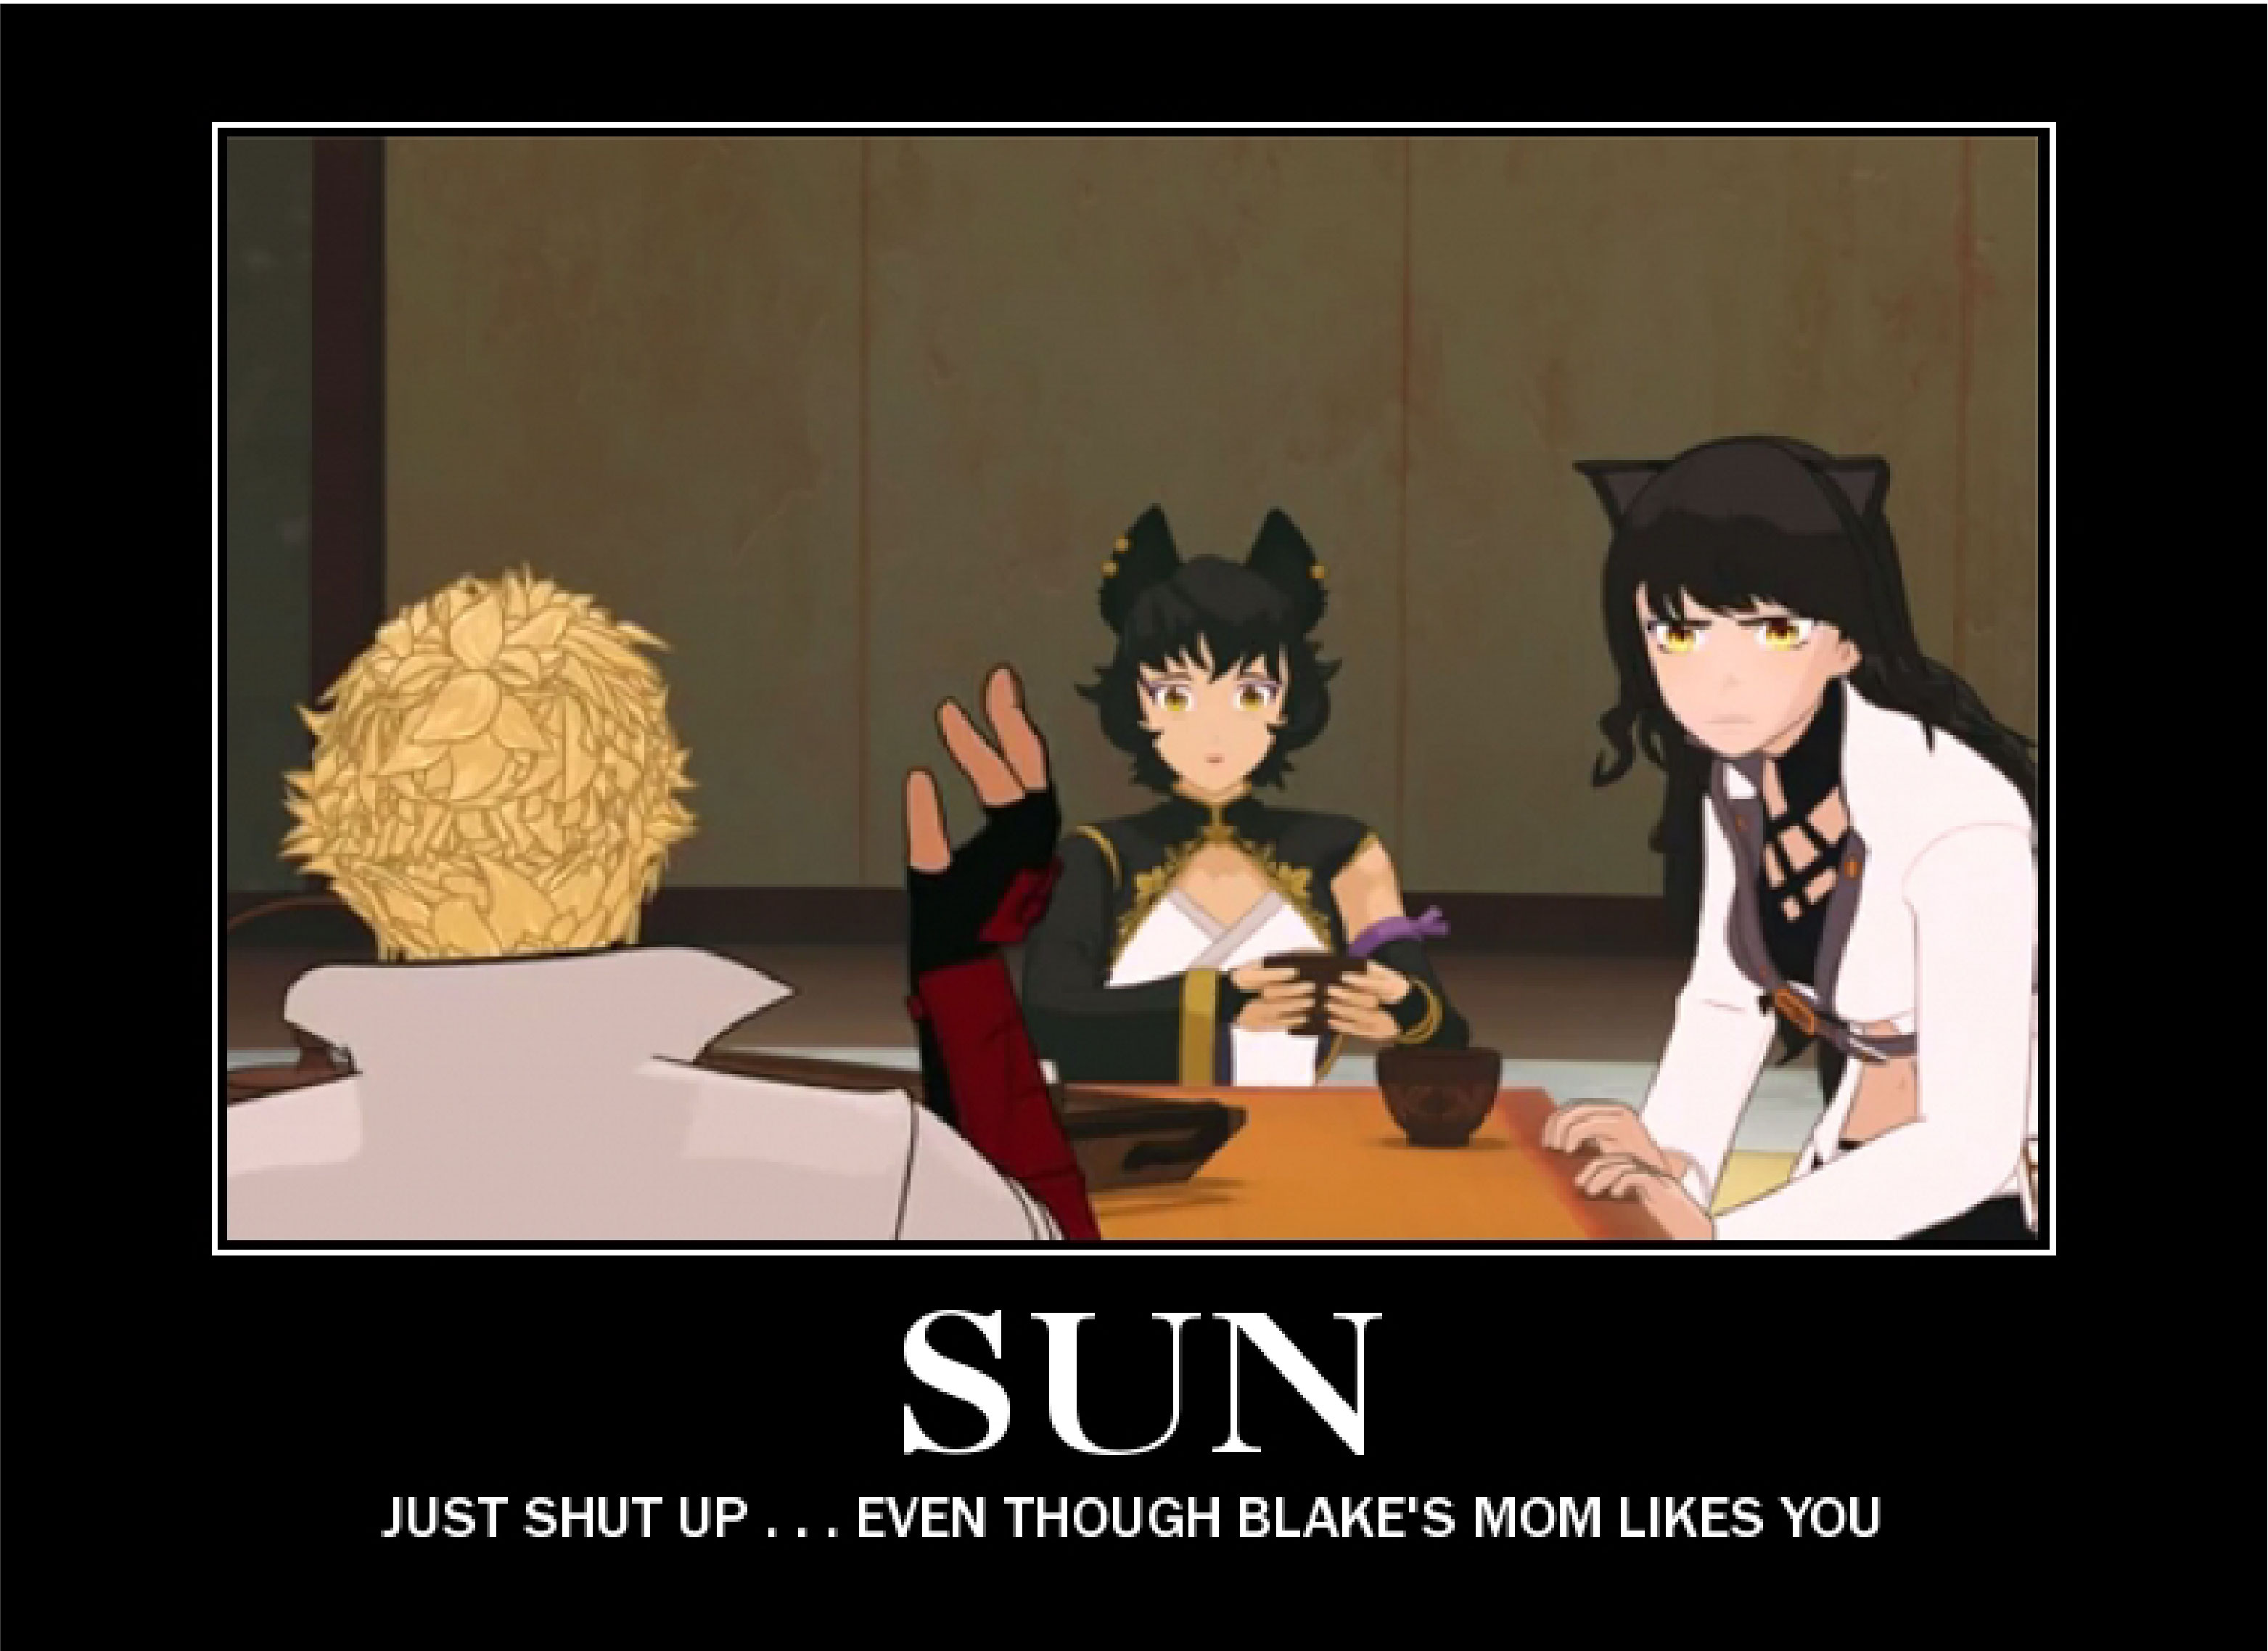 Demotivational Poster RWBY - Snow Hare by JustRWBY-RK on 